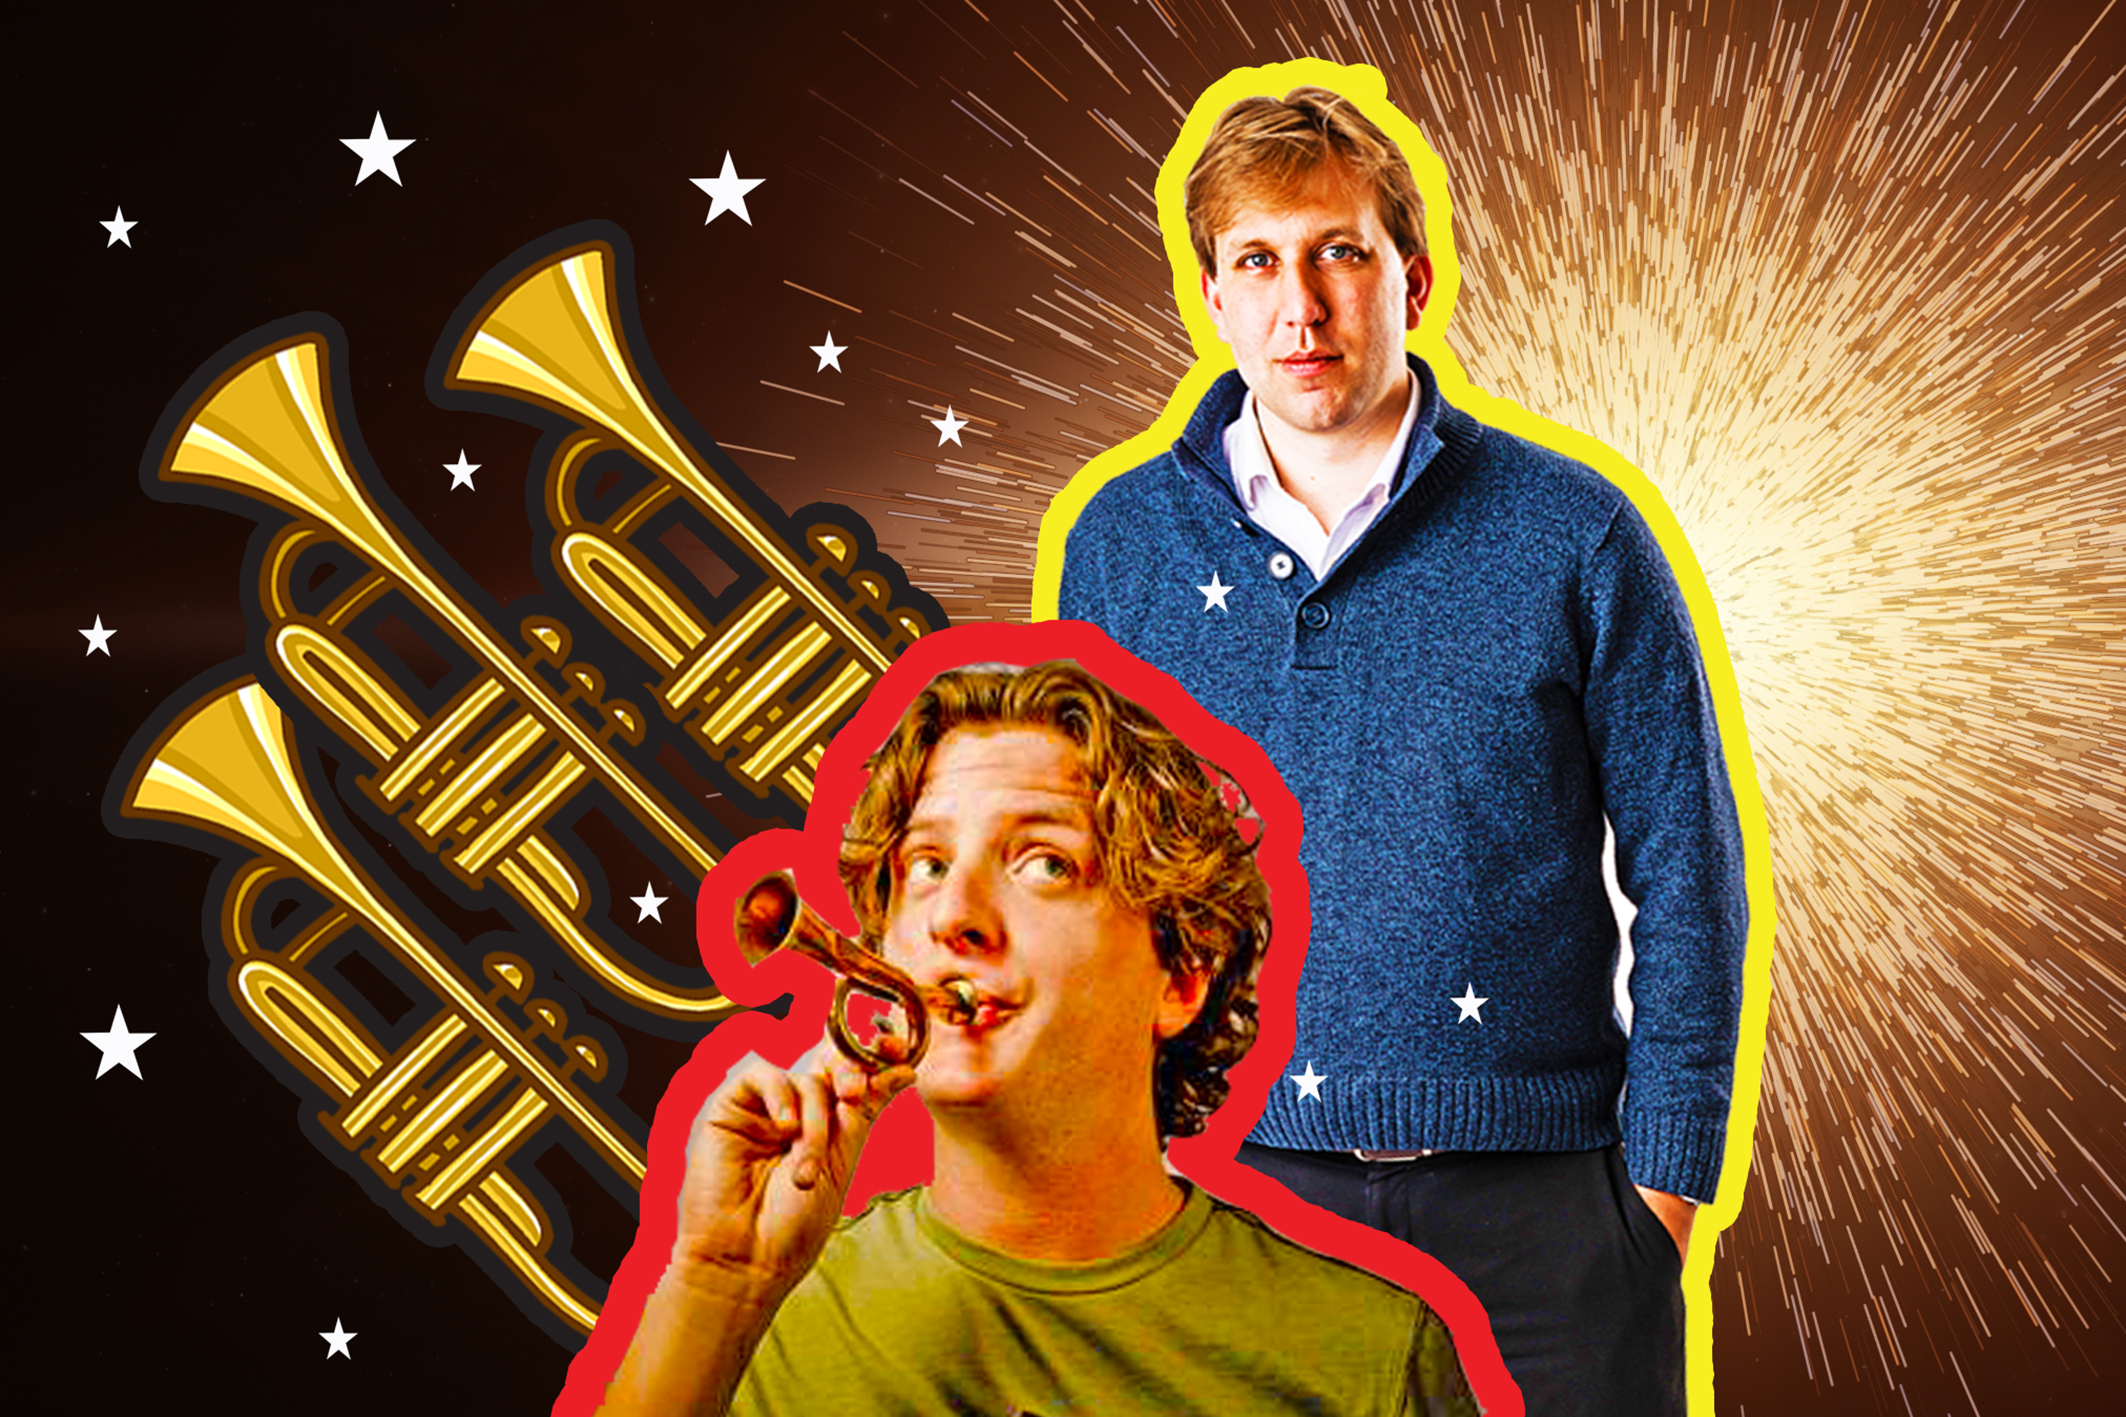 Big Bang to Big Band with Chris Lintott and Steve Pretty - tickets available on the door